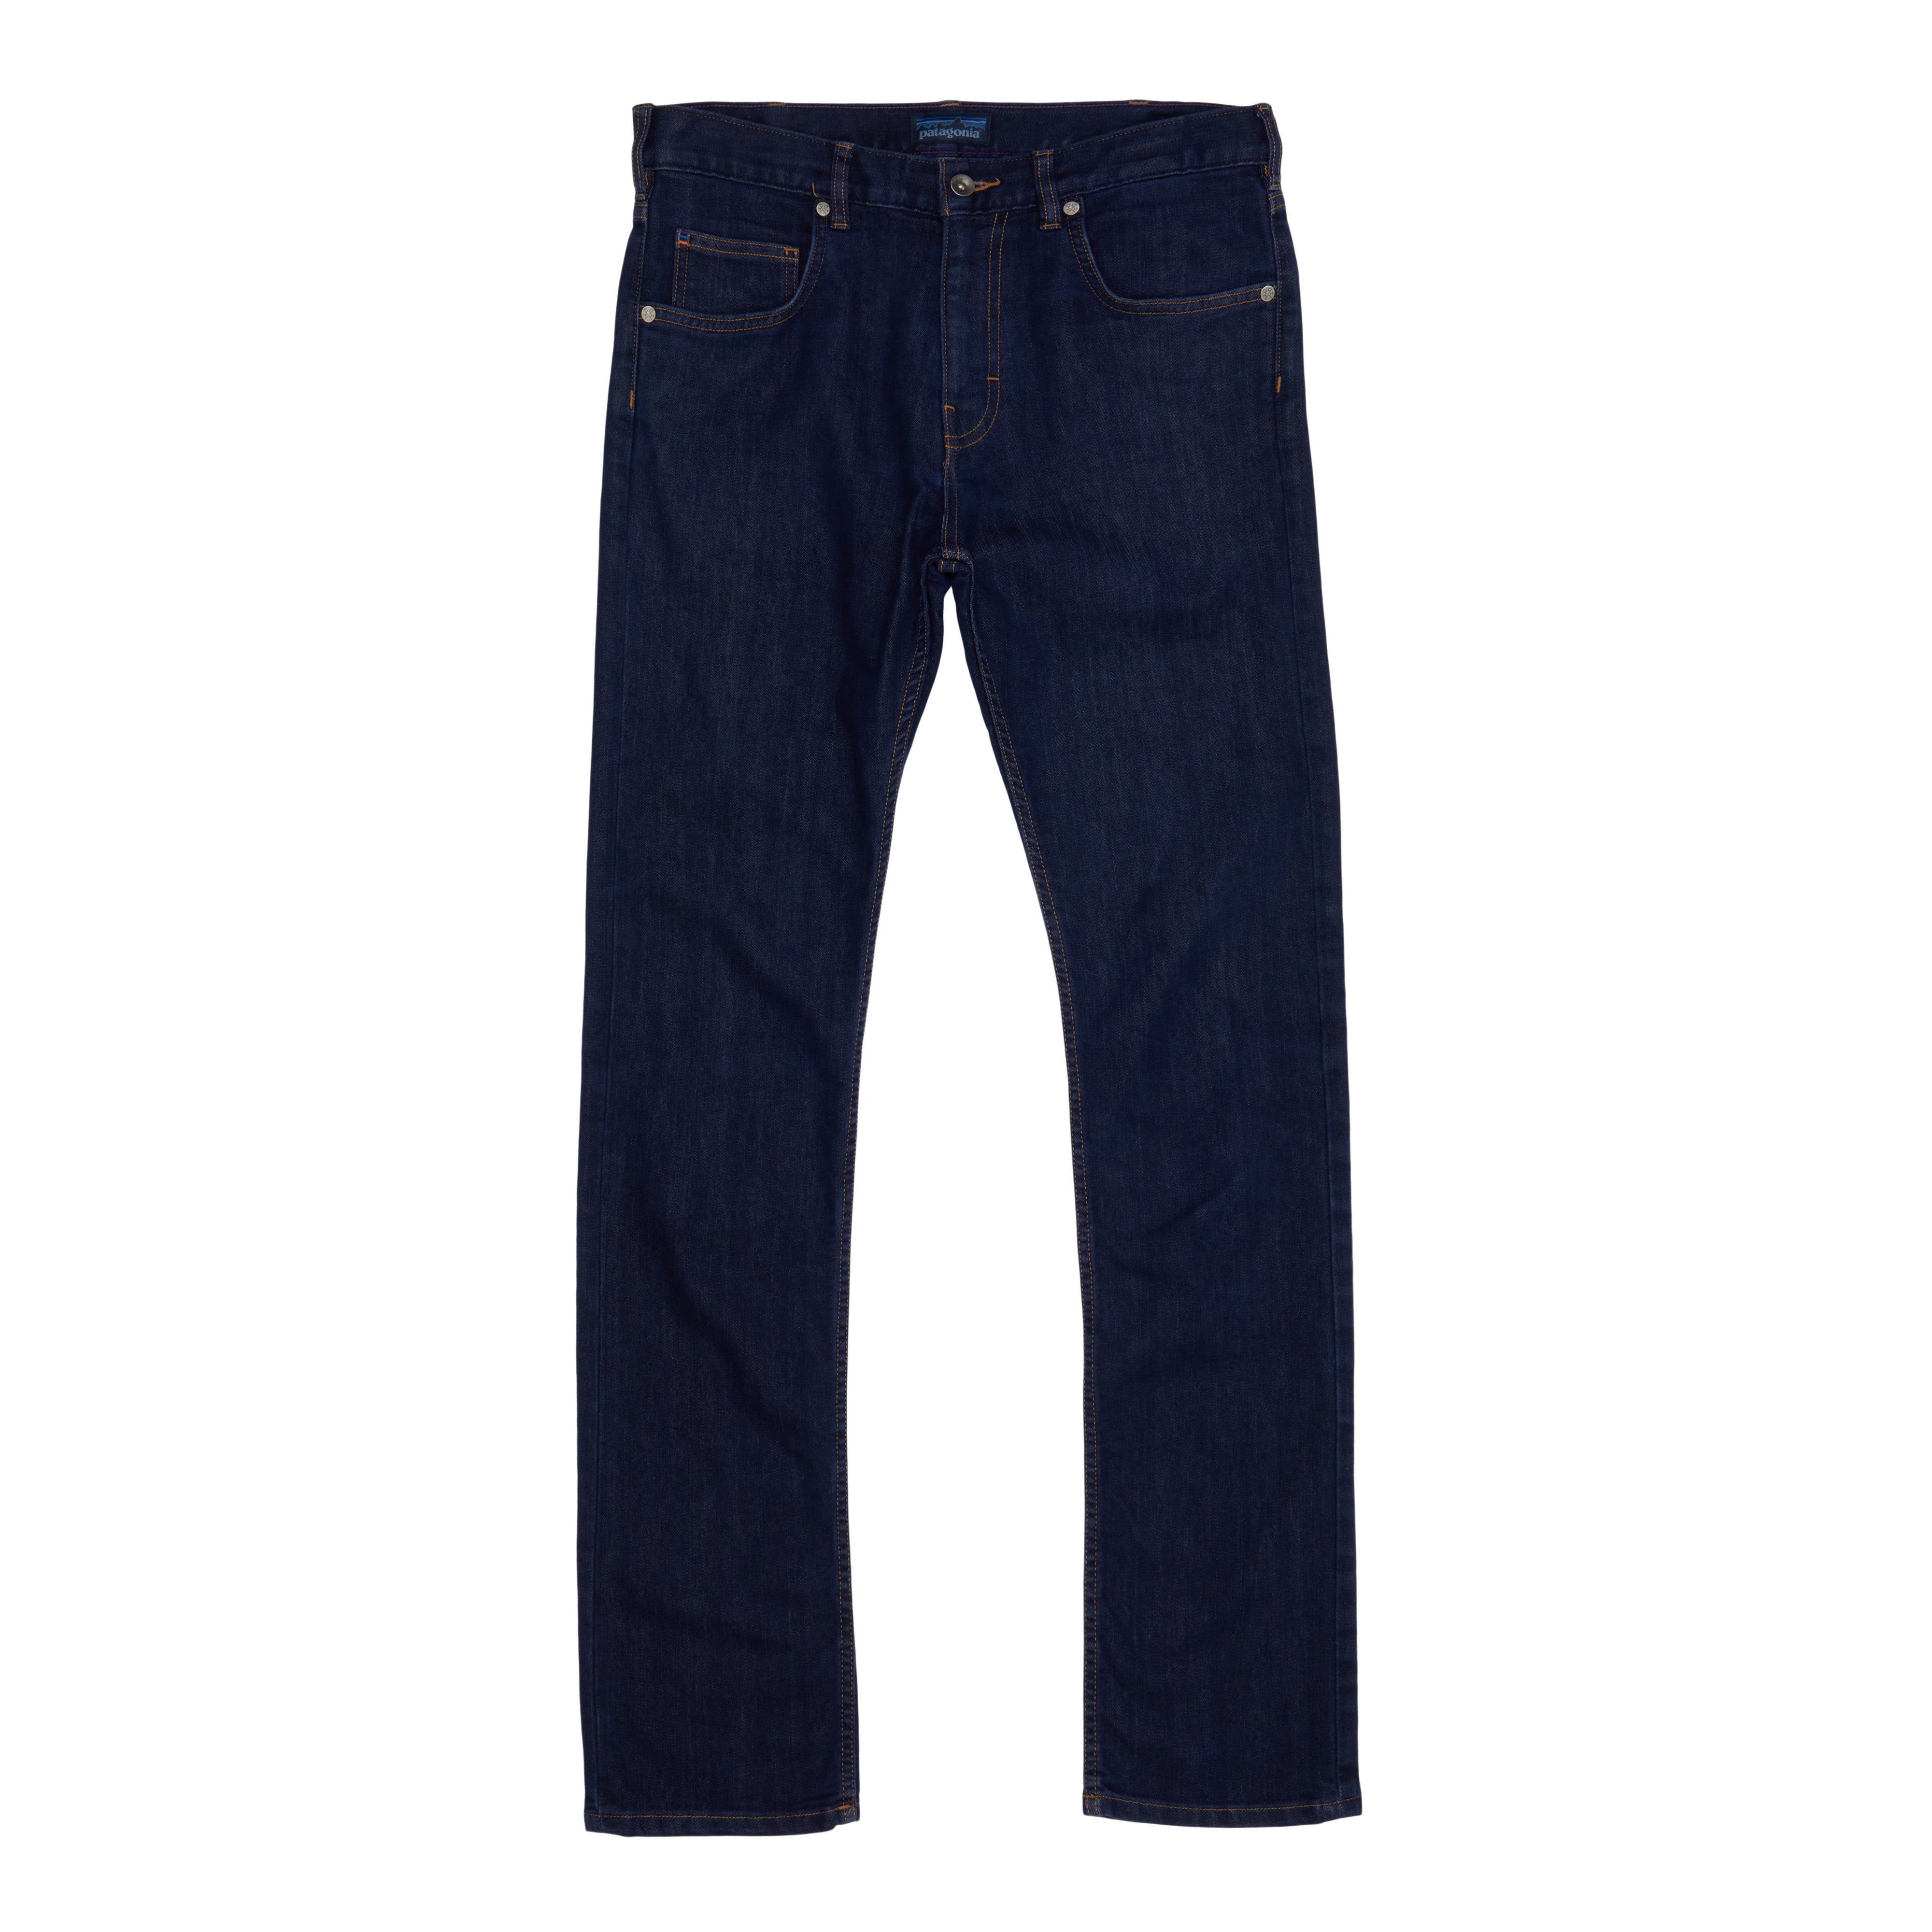 Men's Performance Straight Fit Jeans - Long – Patagonia Worn Wear